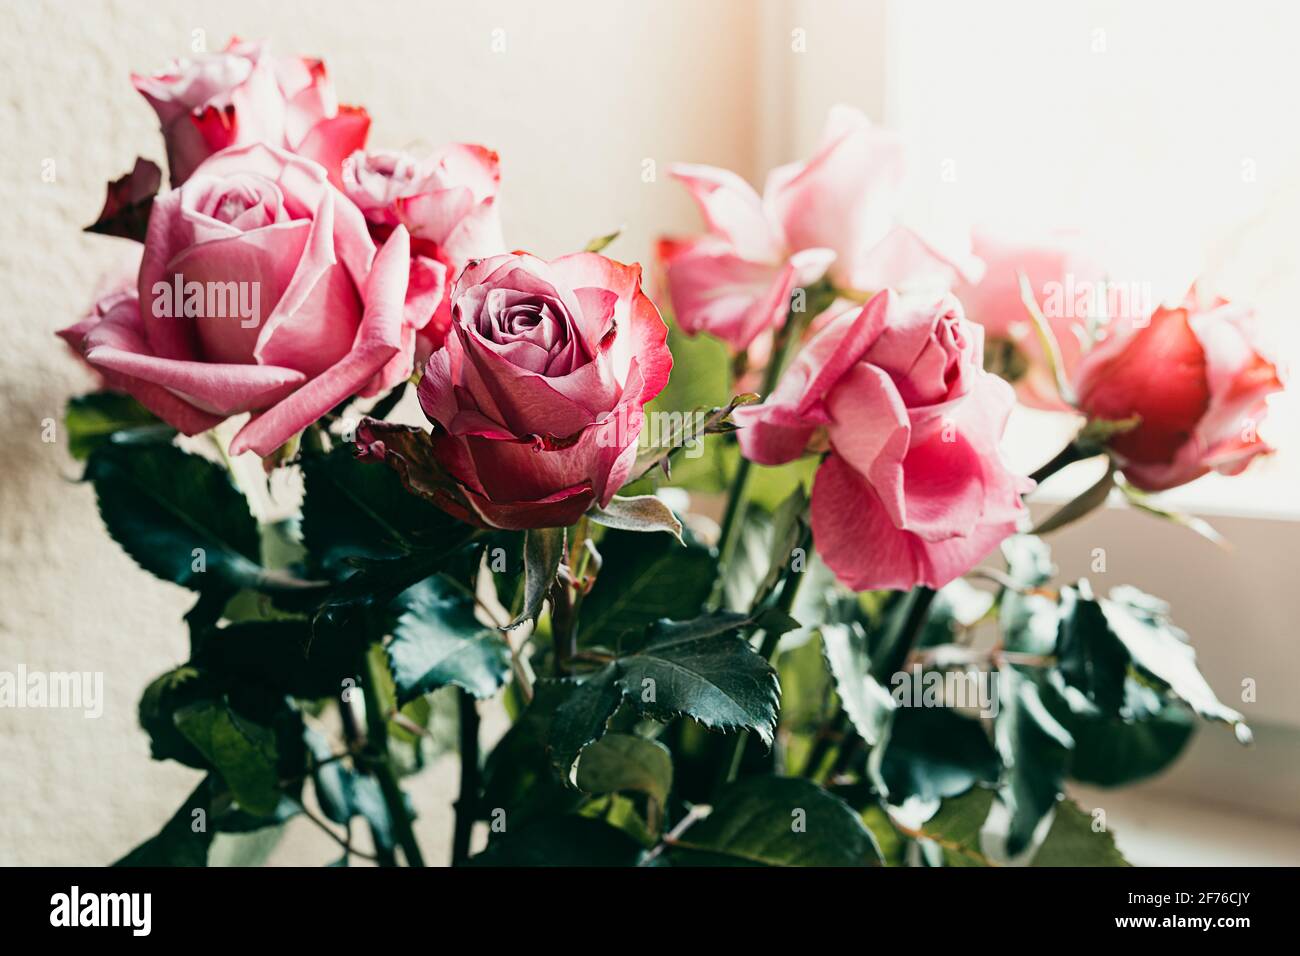 Bouquet of pink roses by the window Stock Photo